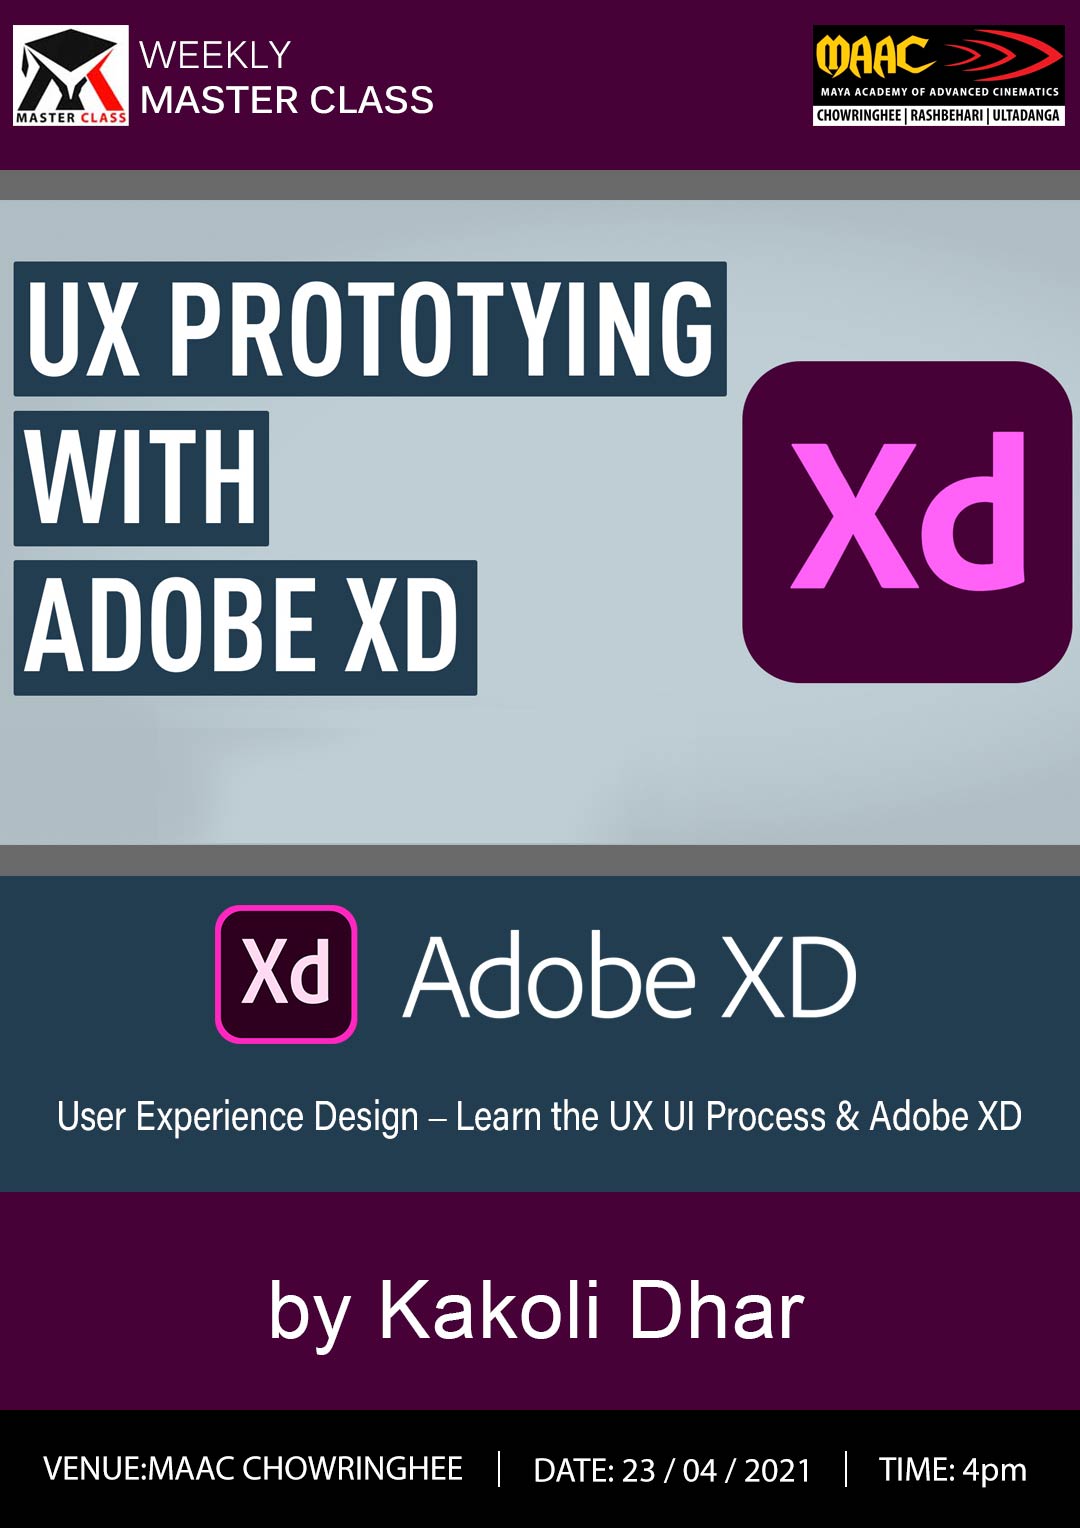 Weekly Master Class on UX Prototying with Adobe XD